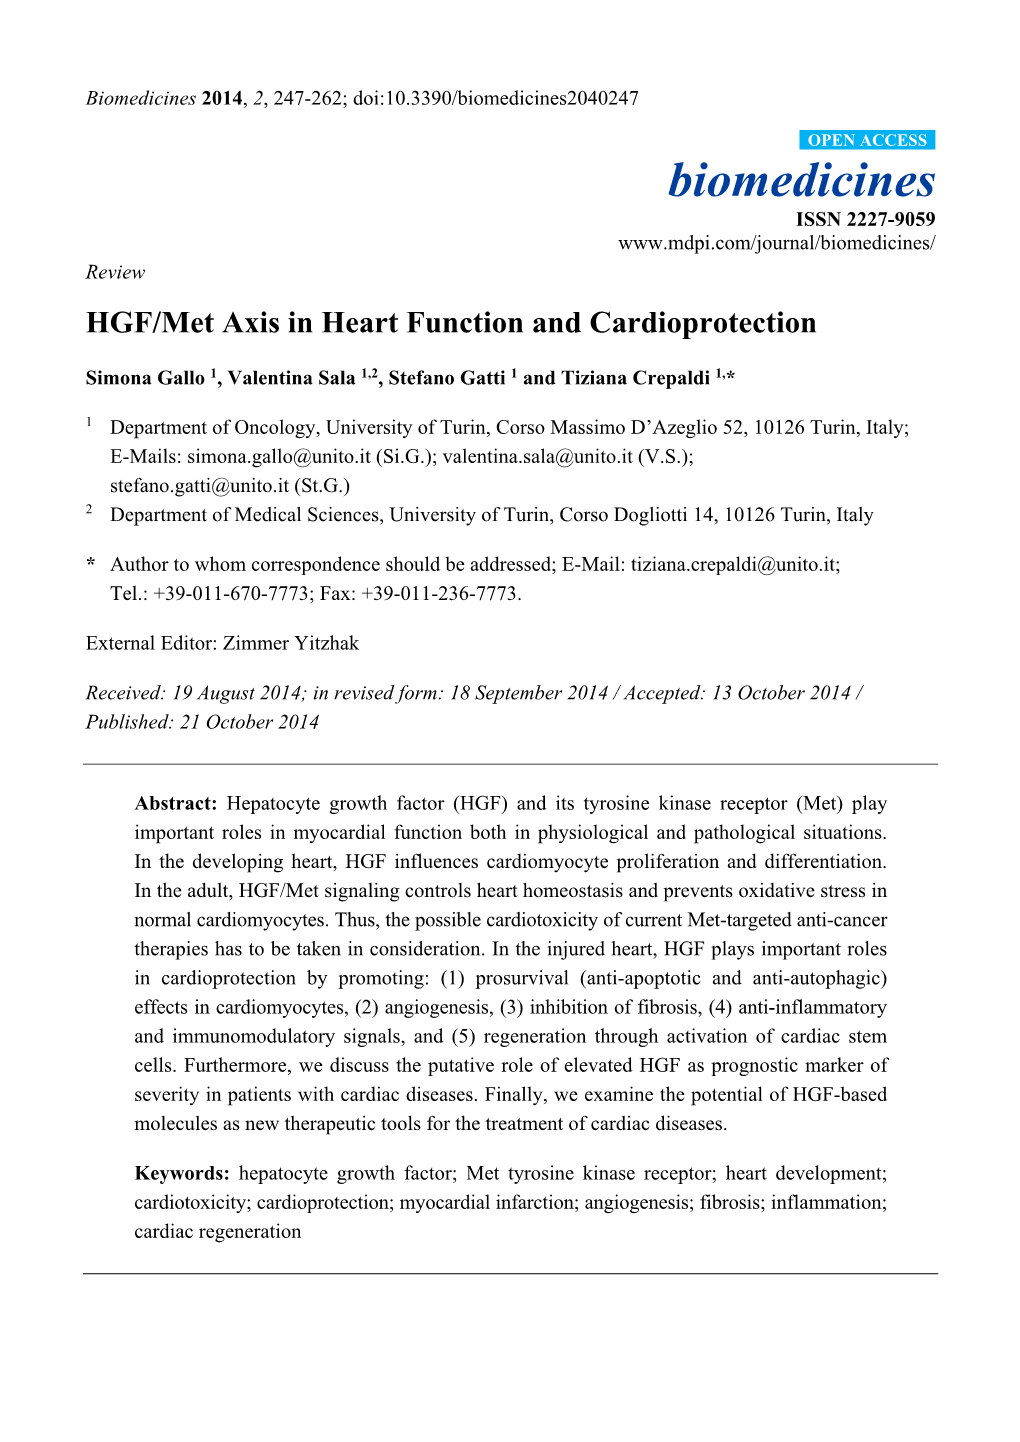 HGF/Met Axis in Heart Function and Cardioprotection